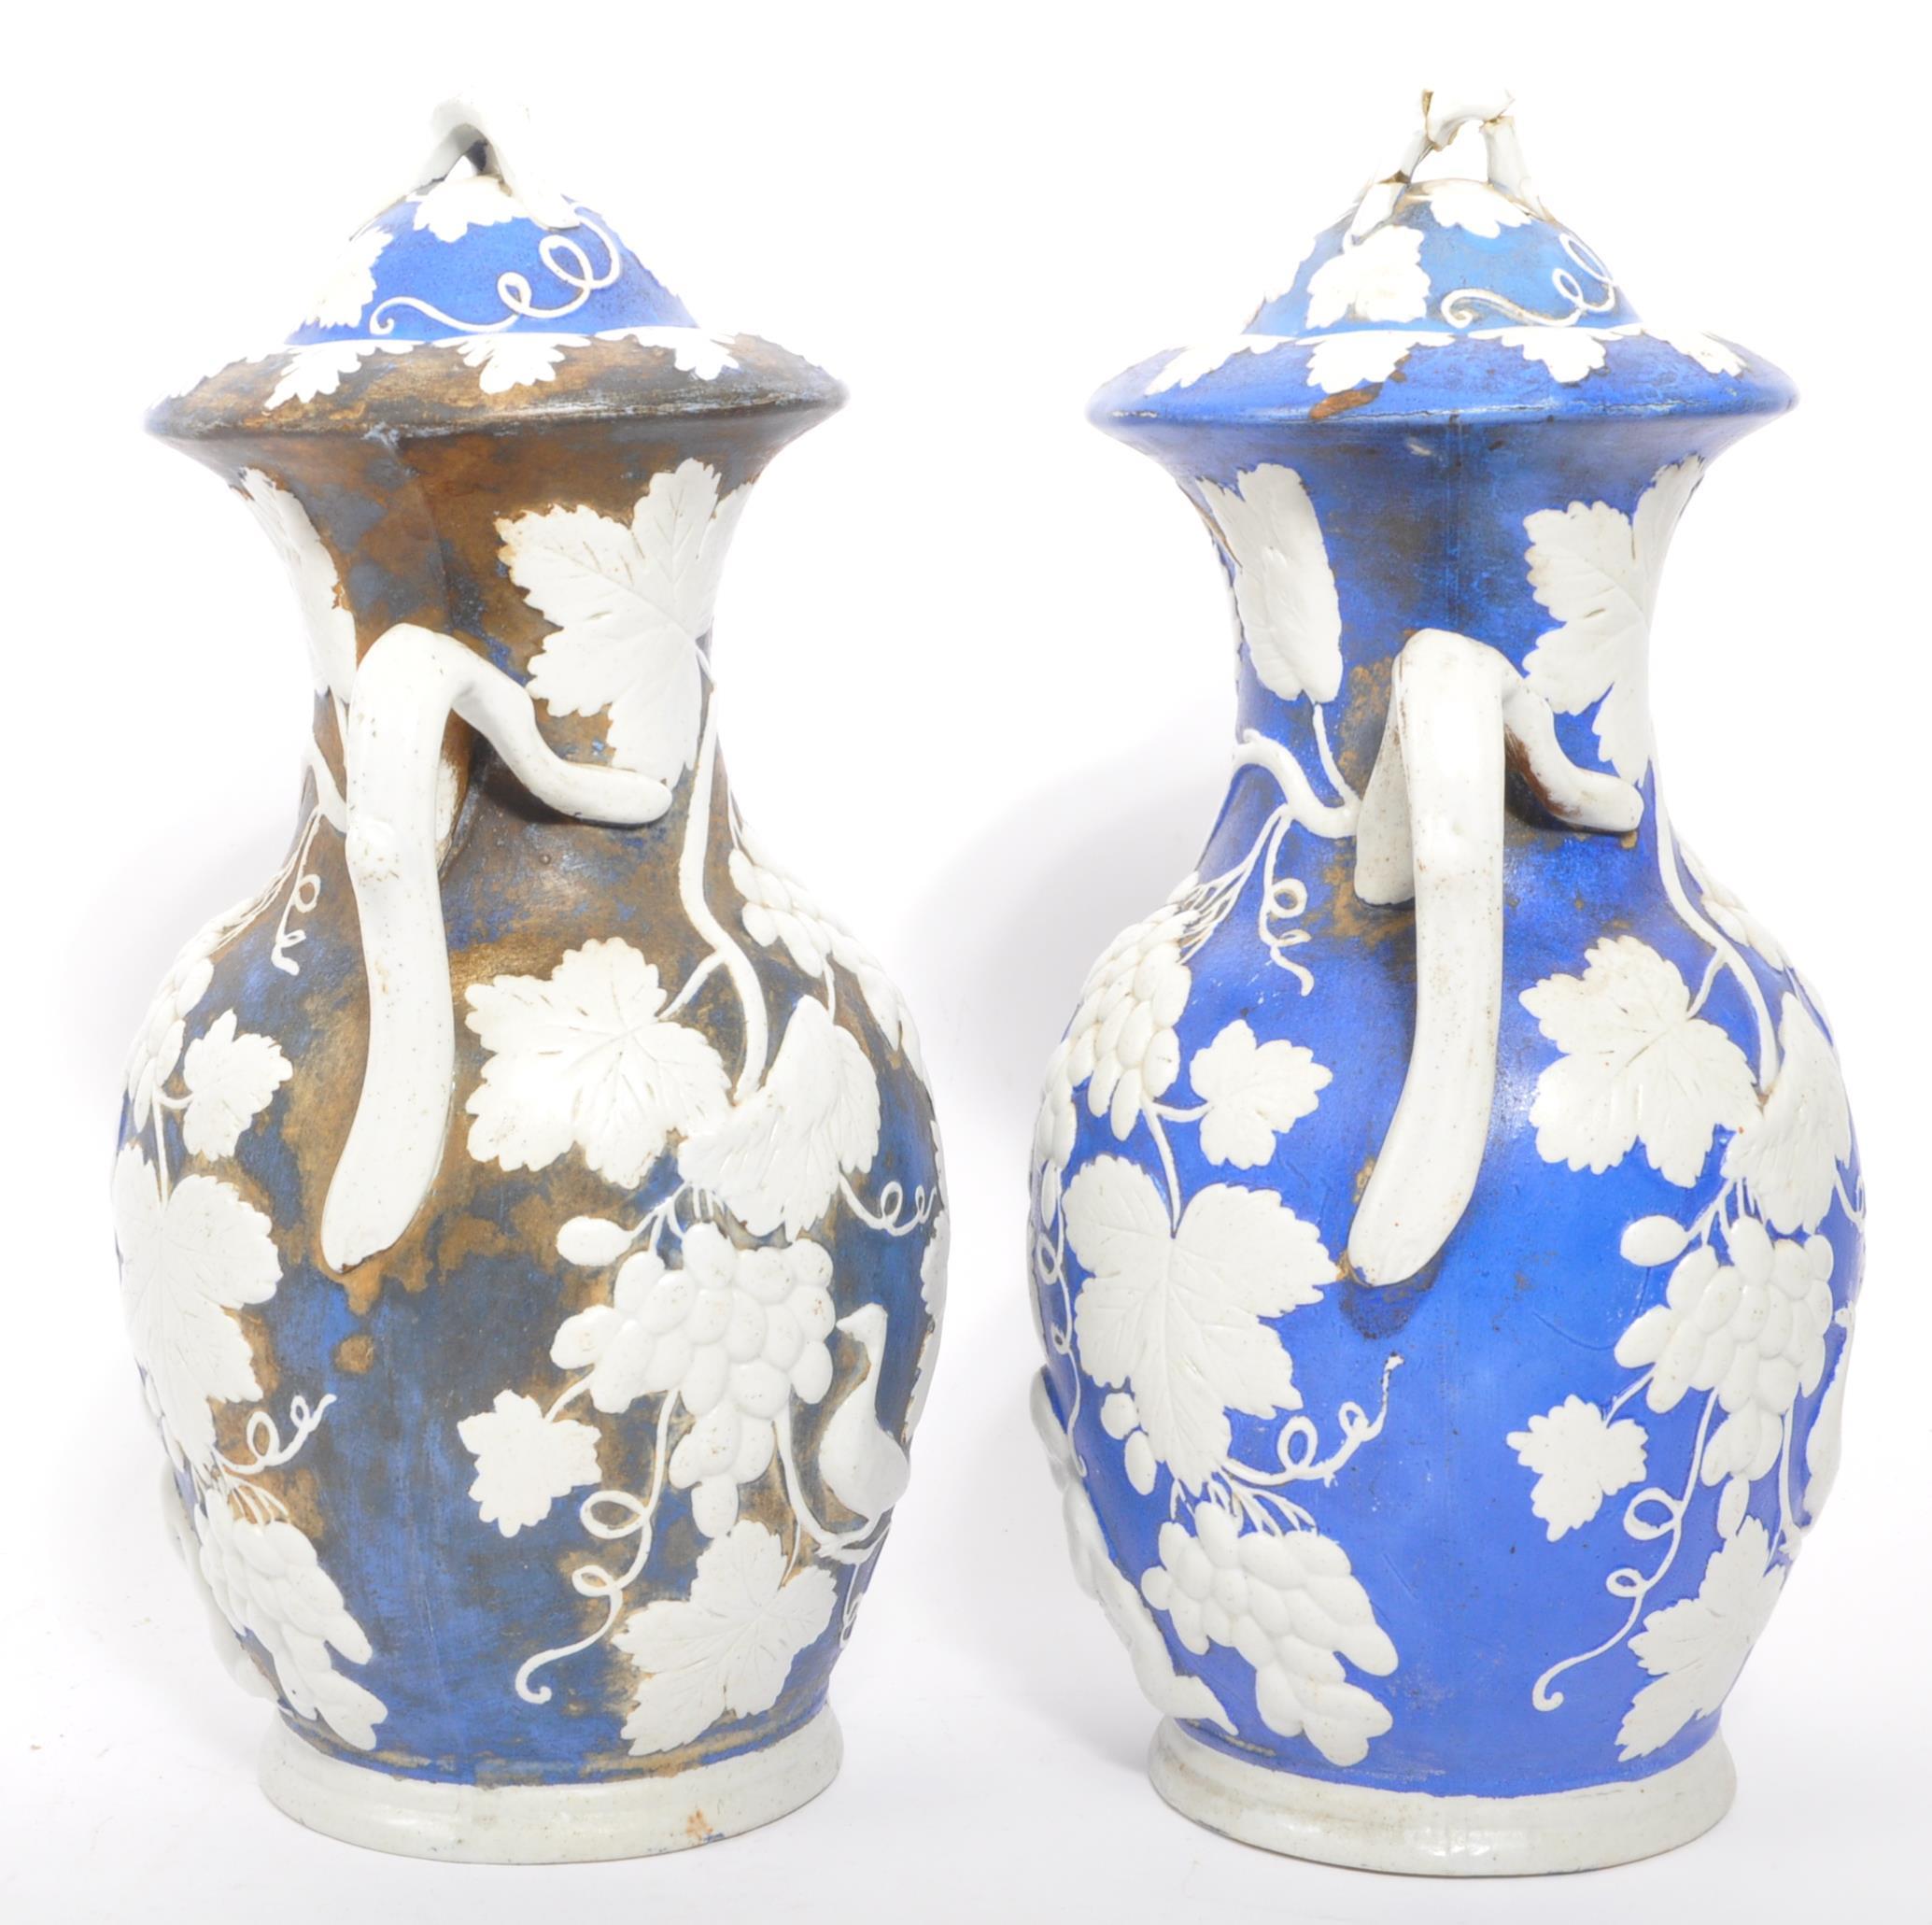 PAIR OF 19TH CENTURY BLUE & WHITE VICTORIAN VASES - Image 2 of 6